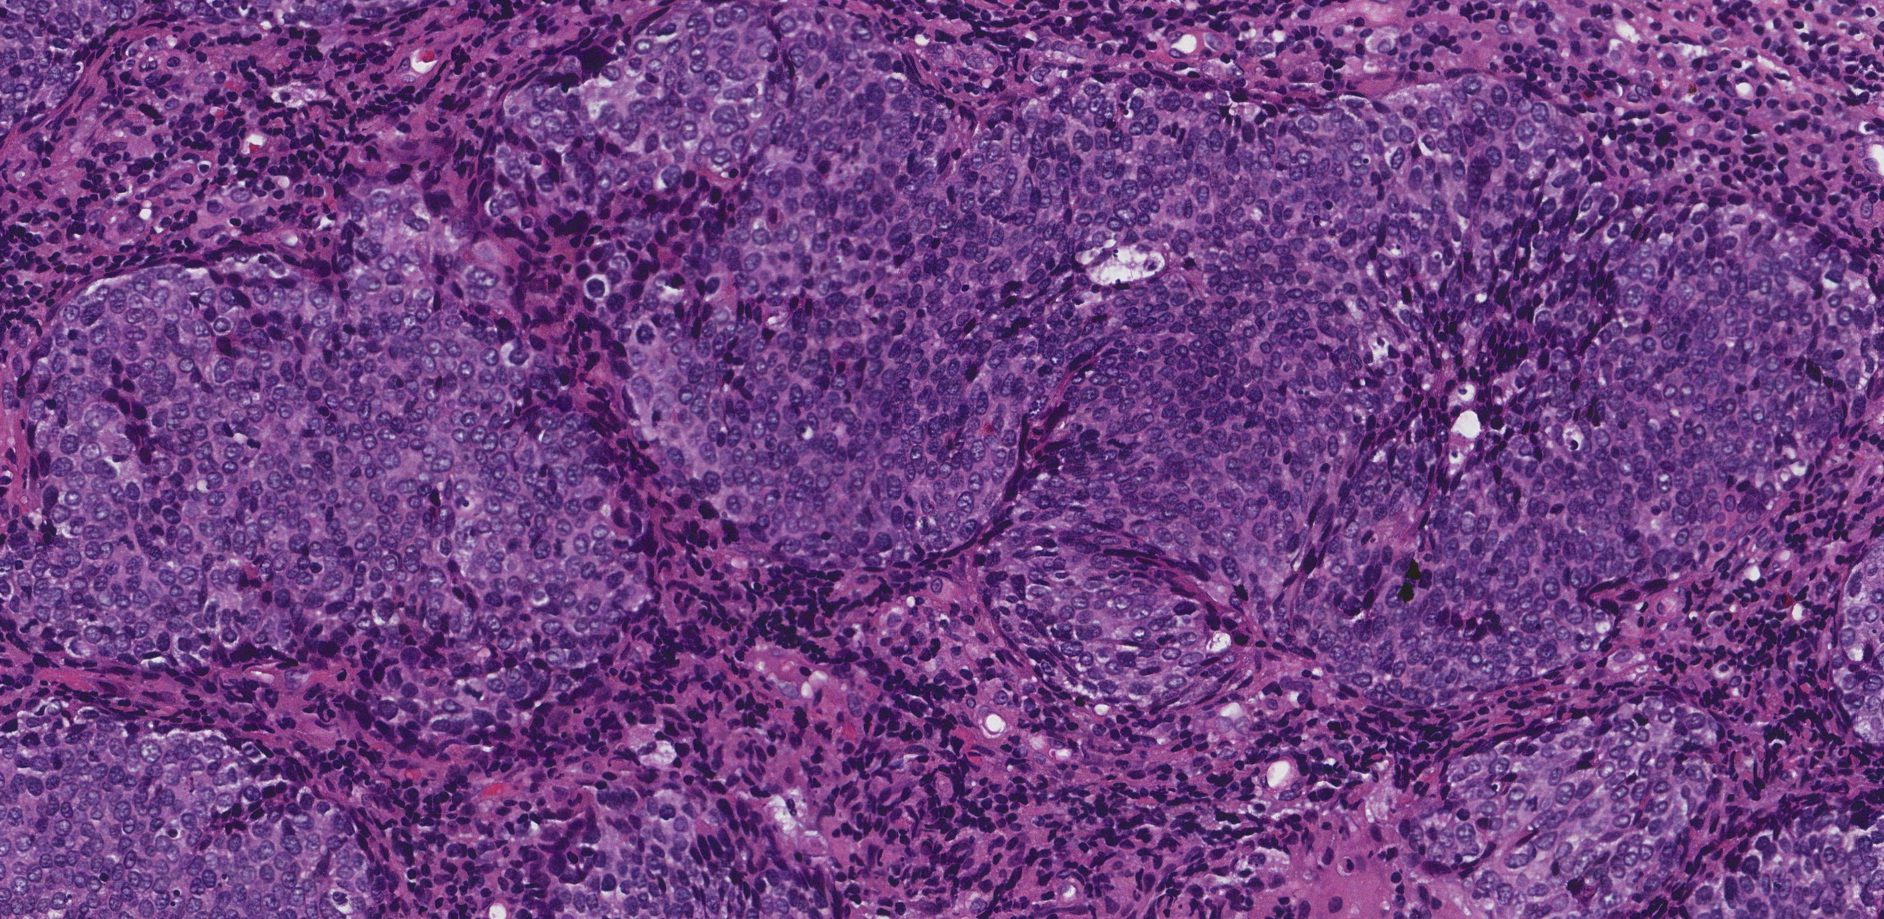 This picture shows an example of nonkeratinizing squamous cell carcinoma of the oropharynx.